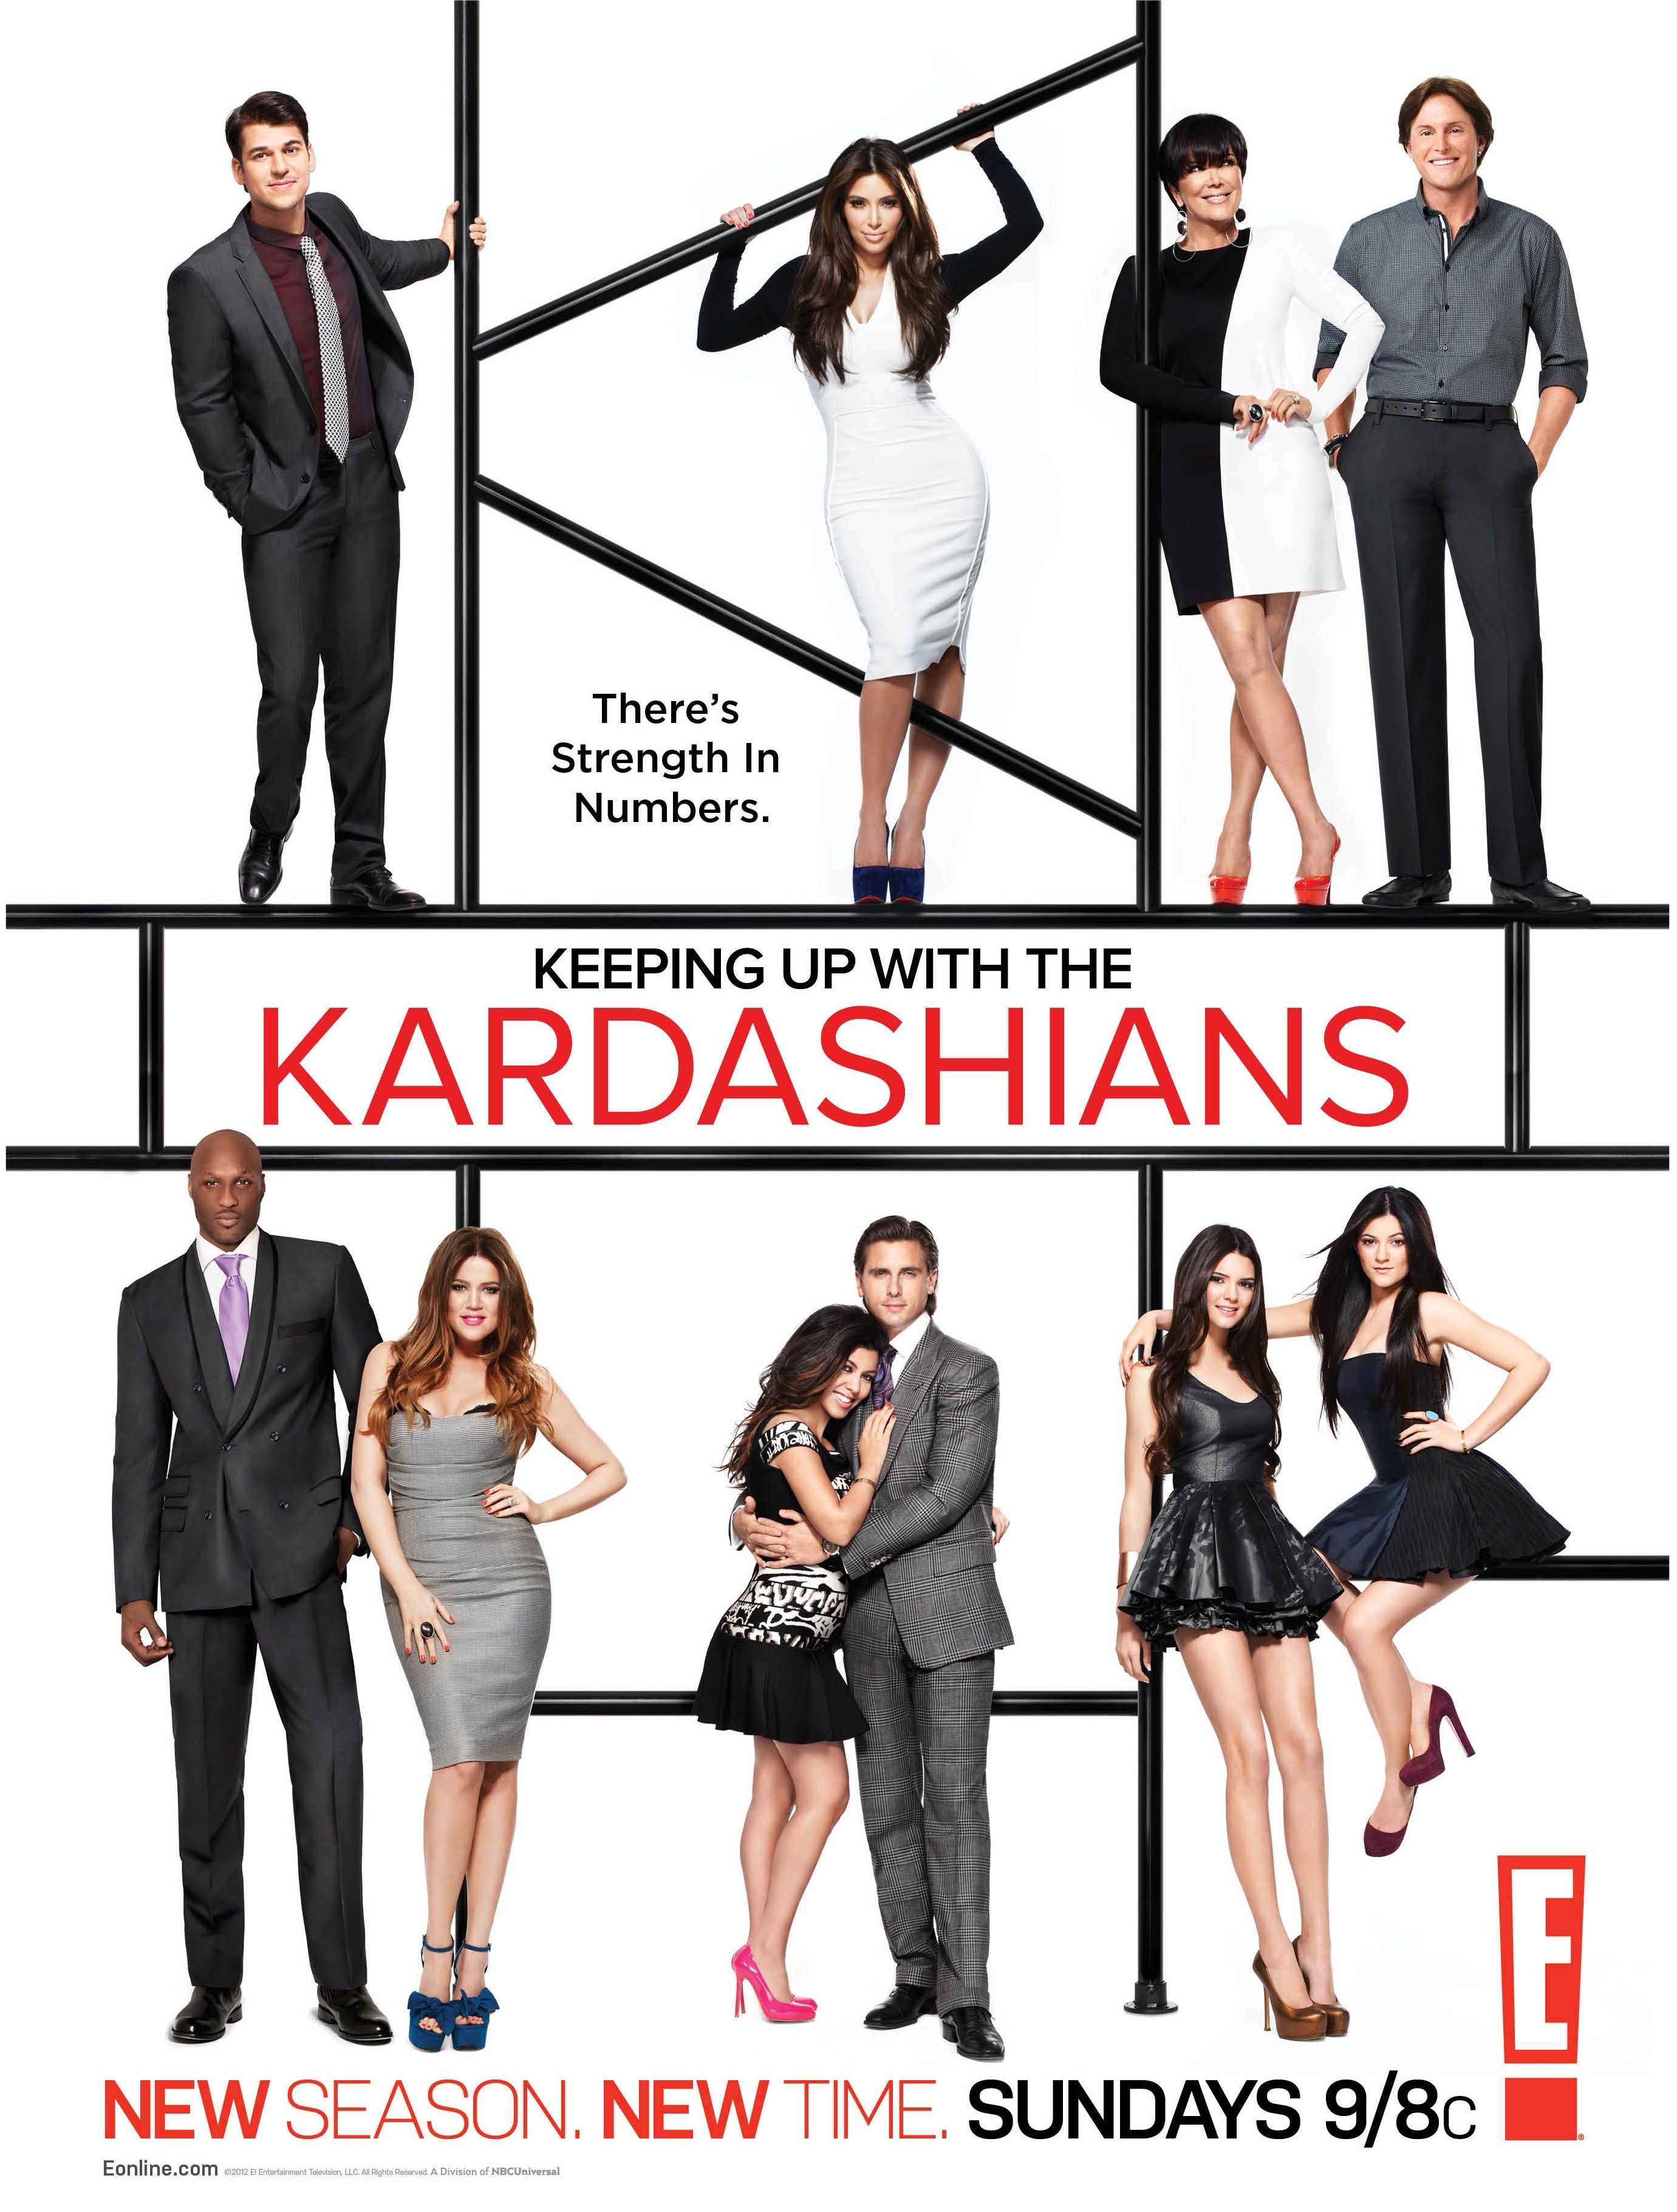 Keeping Up With The Kardashians Season 7 Episode 9 Watch Online